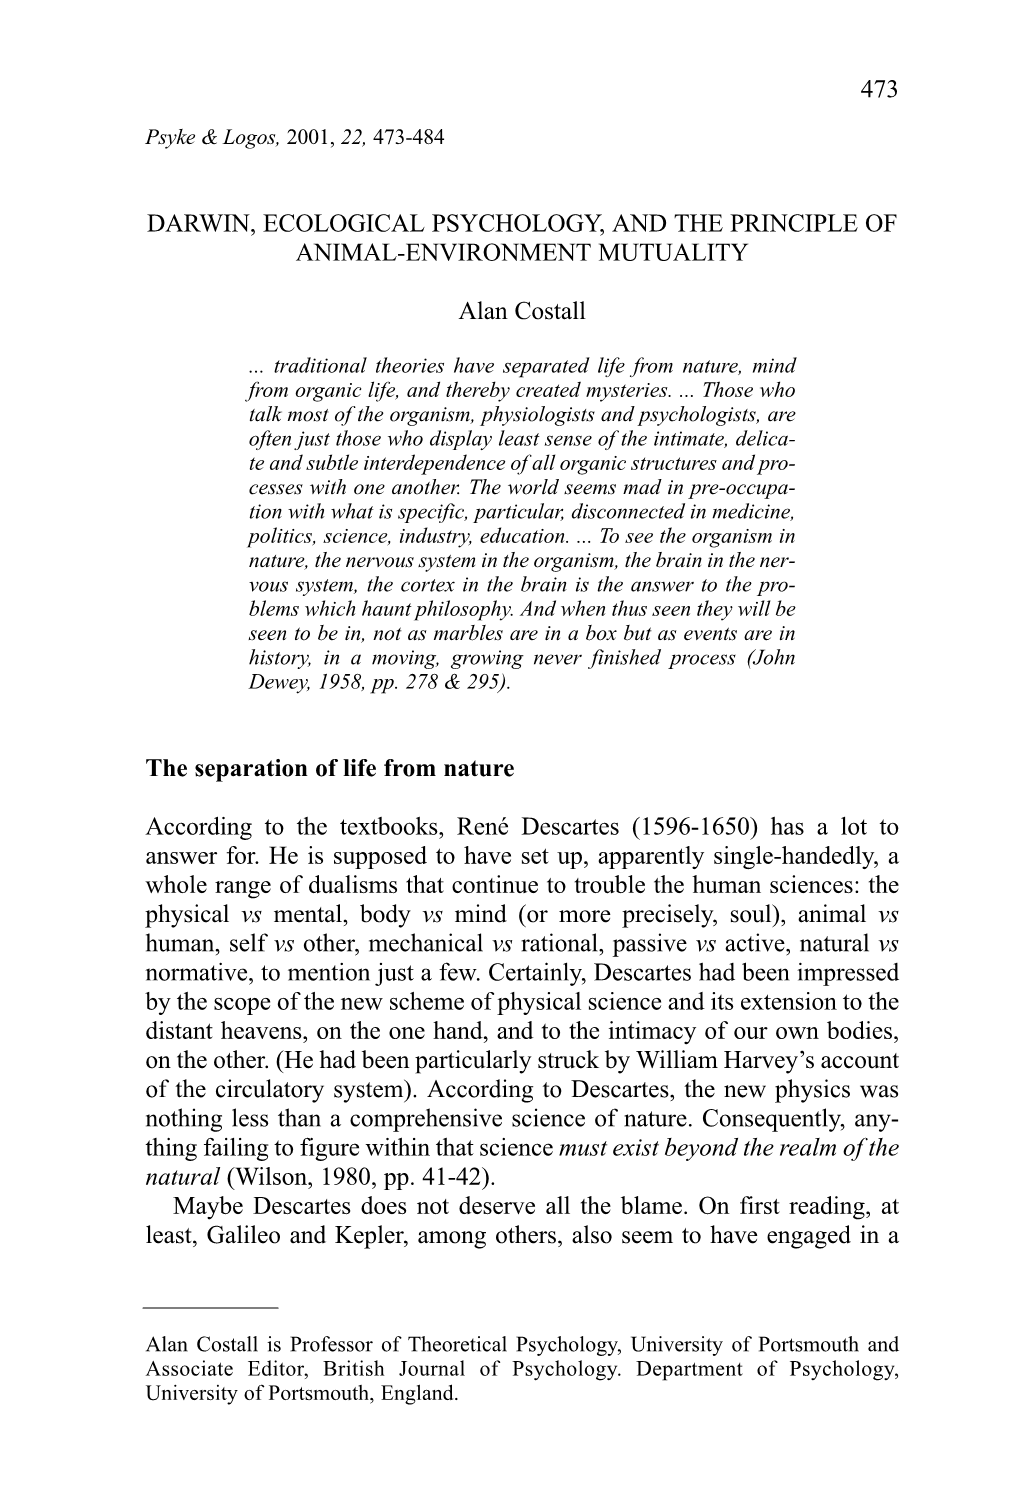 Darwin, Ecological Psychology, and the Principle of Animal-Environment Mutuality